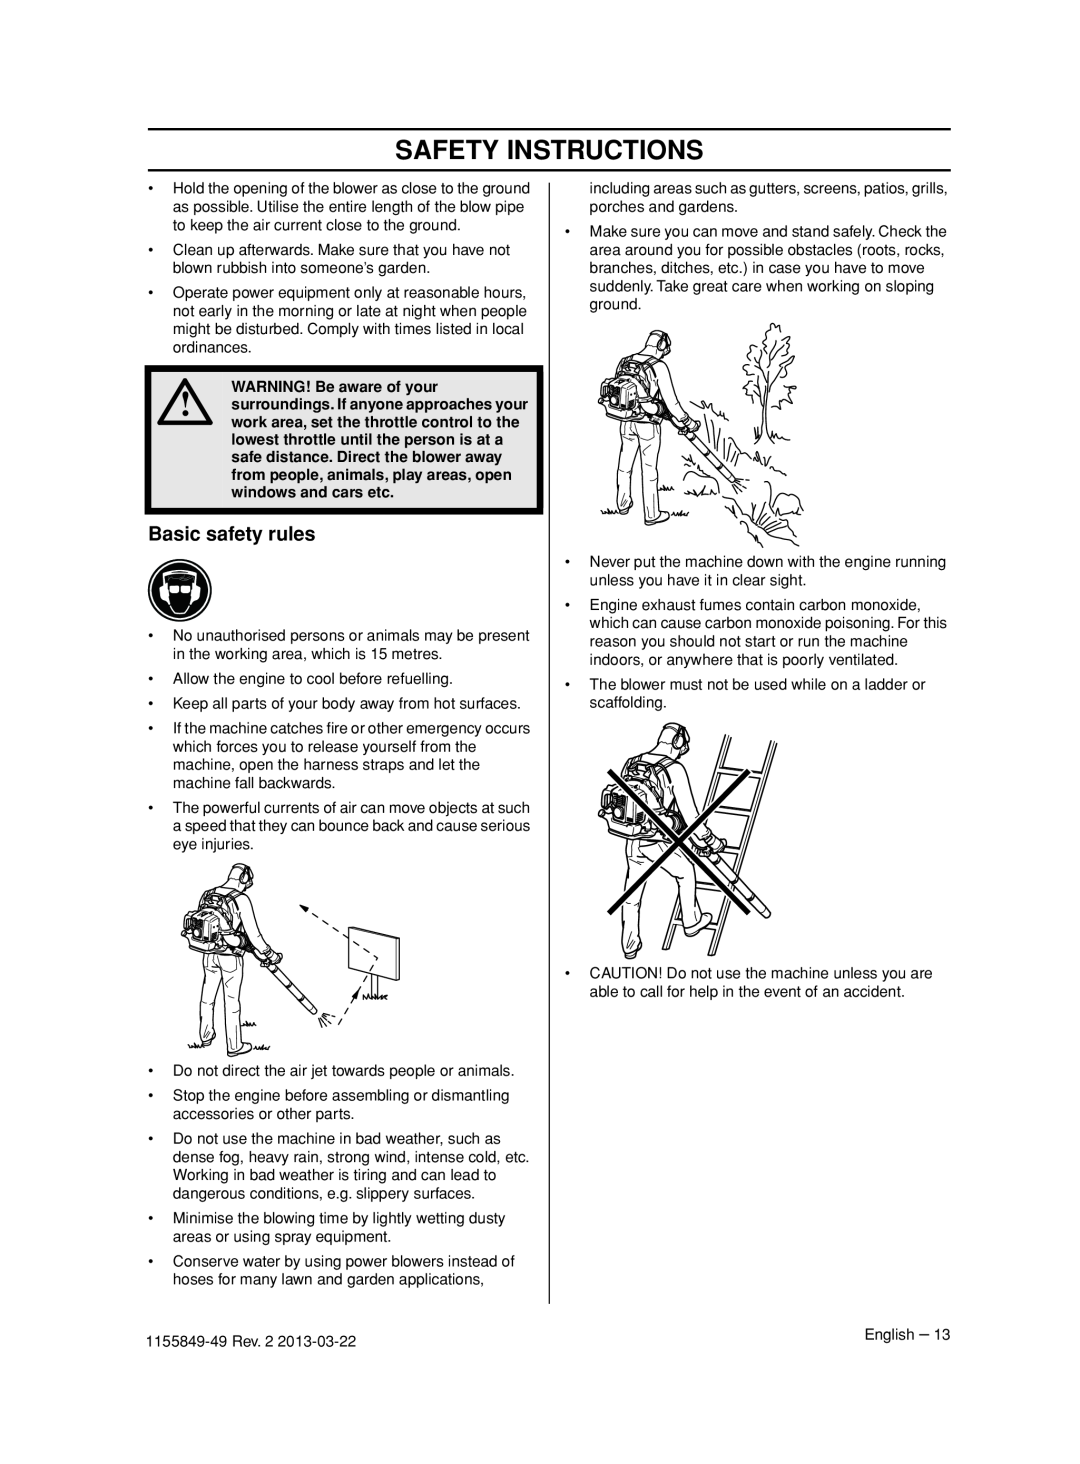 Husqvarna 966629402, 966631102 Basic safety rules, Safety Instructions, WARNING! Be aware of your, windows and cars etc 